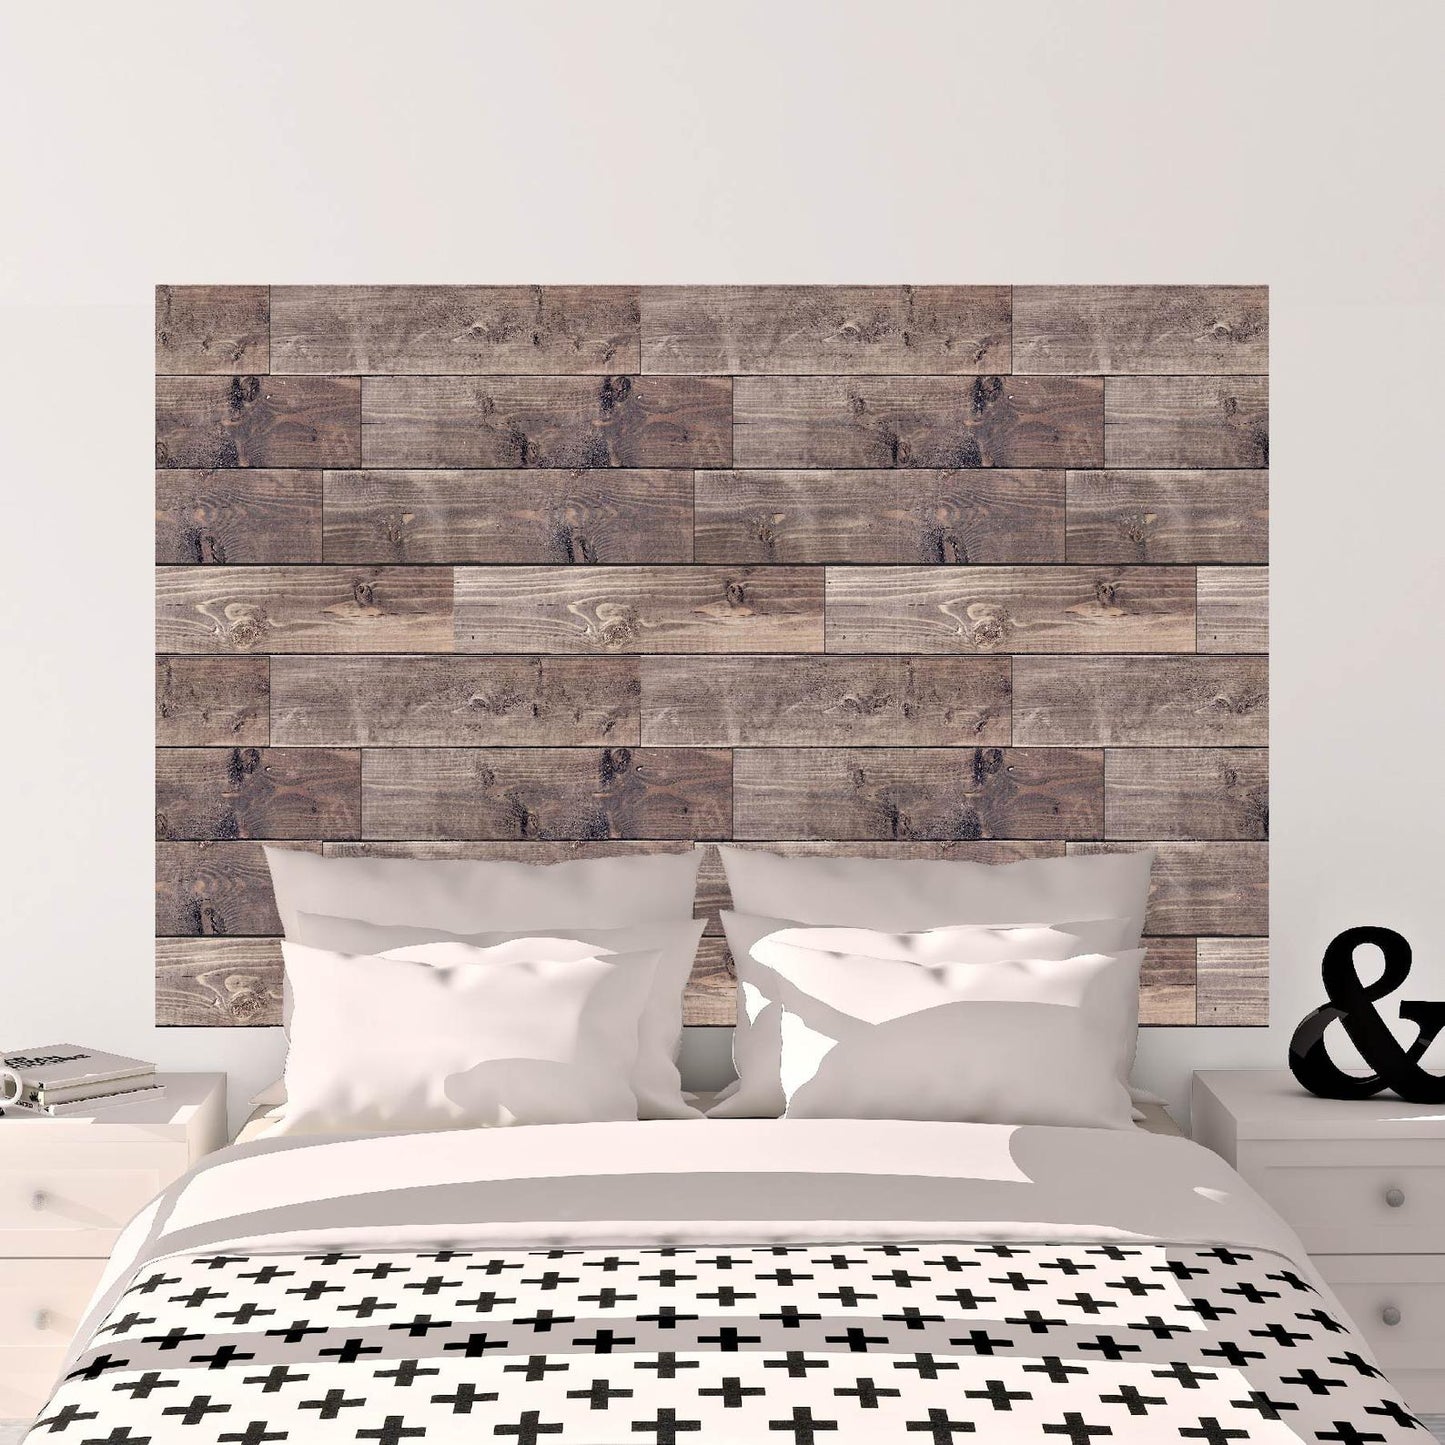 Rustic Wood Plank Wall Decal Panels | Faux Pallet Headboard Wall Sticker - Picture Perfect Decals